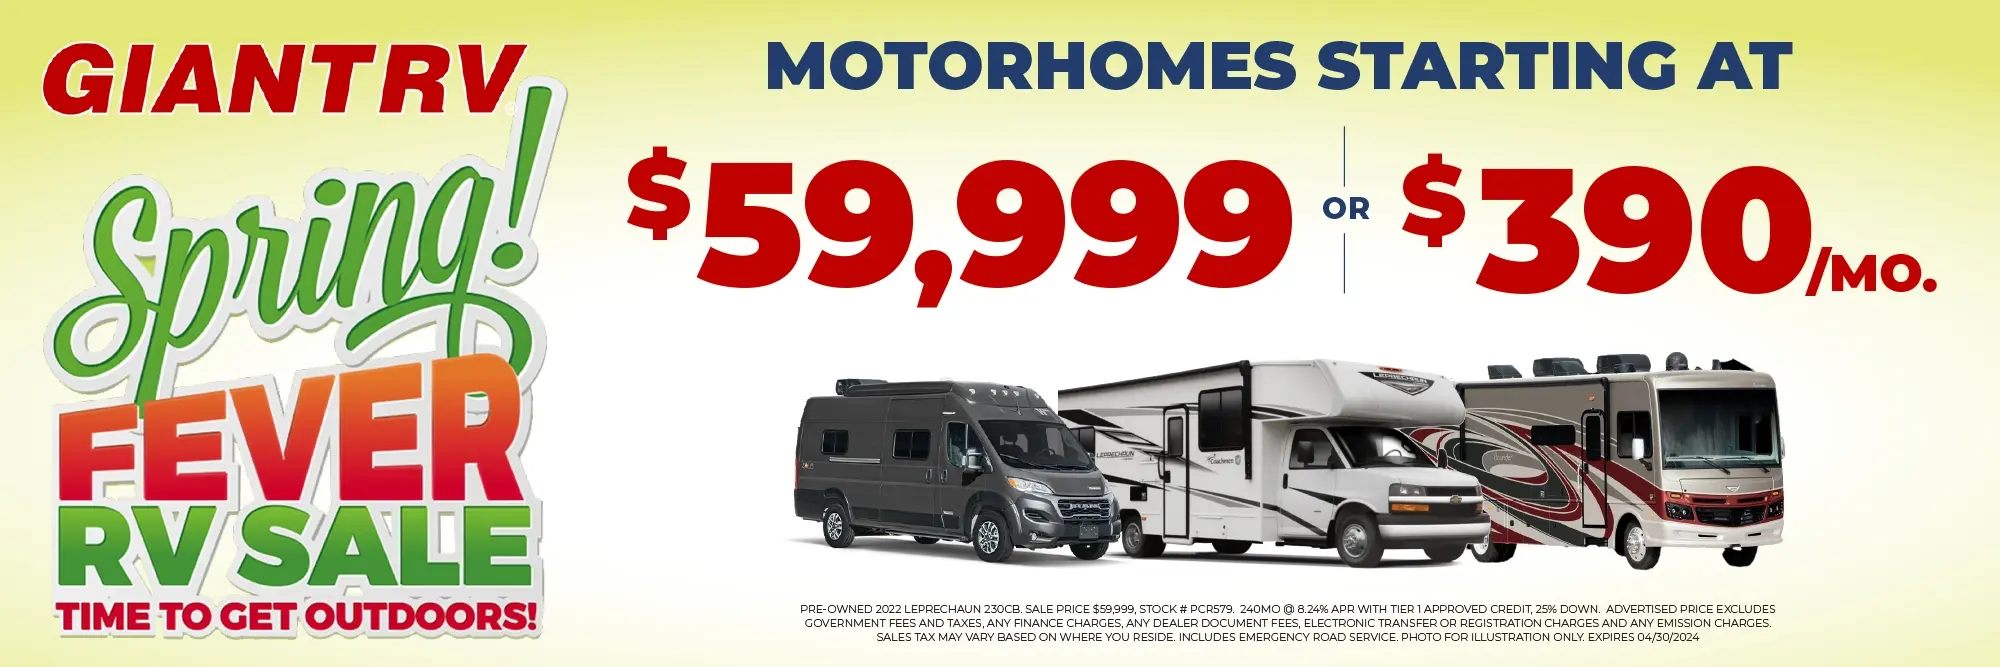 Giant RV Spring Fever RV Sale - Motorhomes Starting at $59,999 or $390/Month